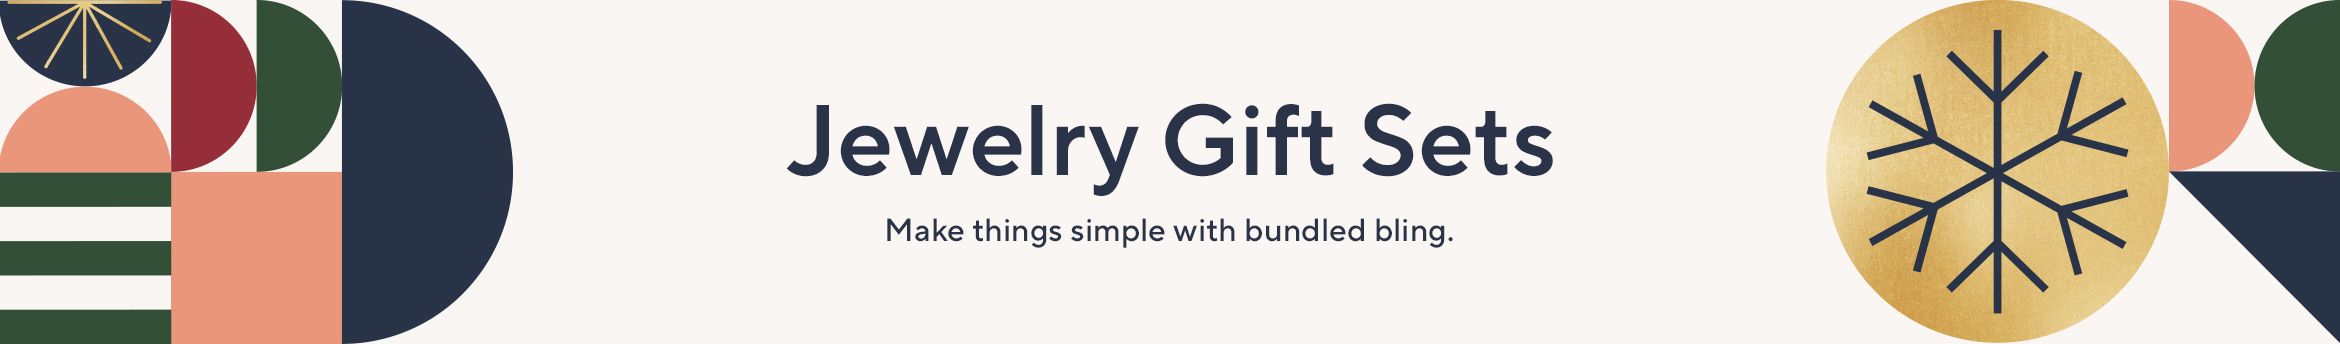 Jewelry Gift Sets. Make things simple with bundled bling.